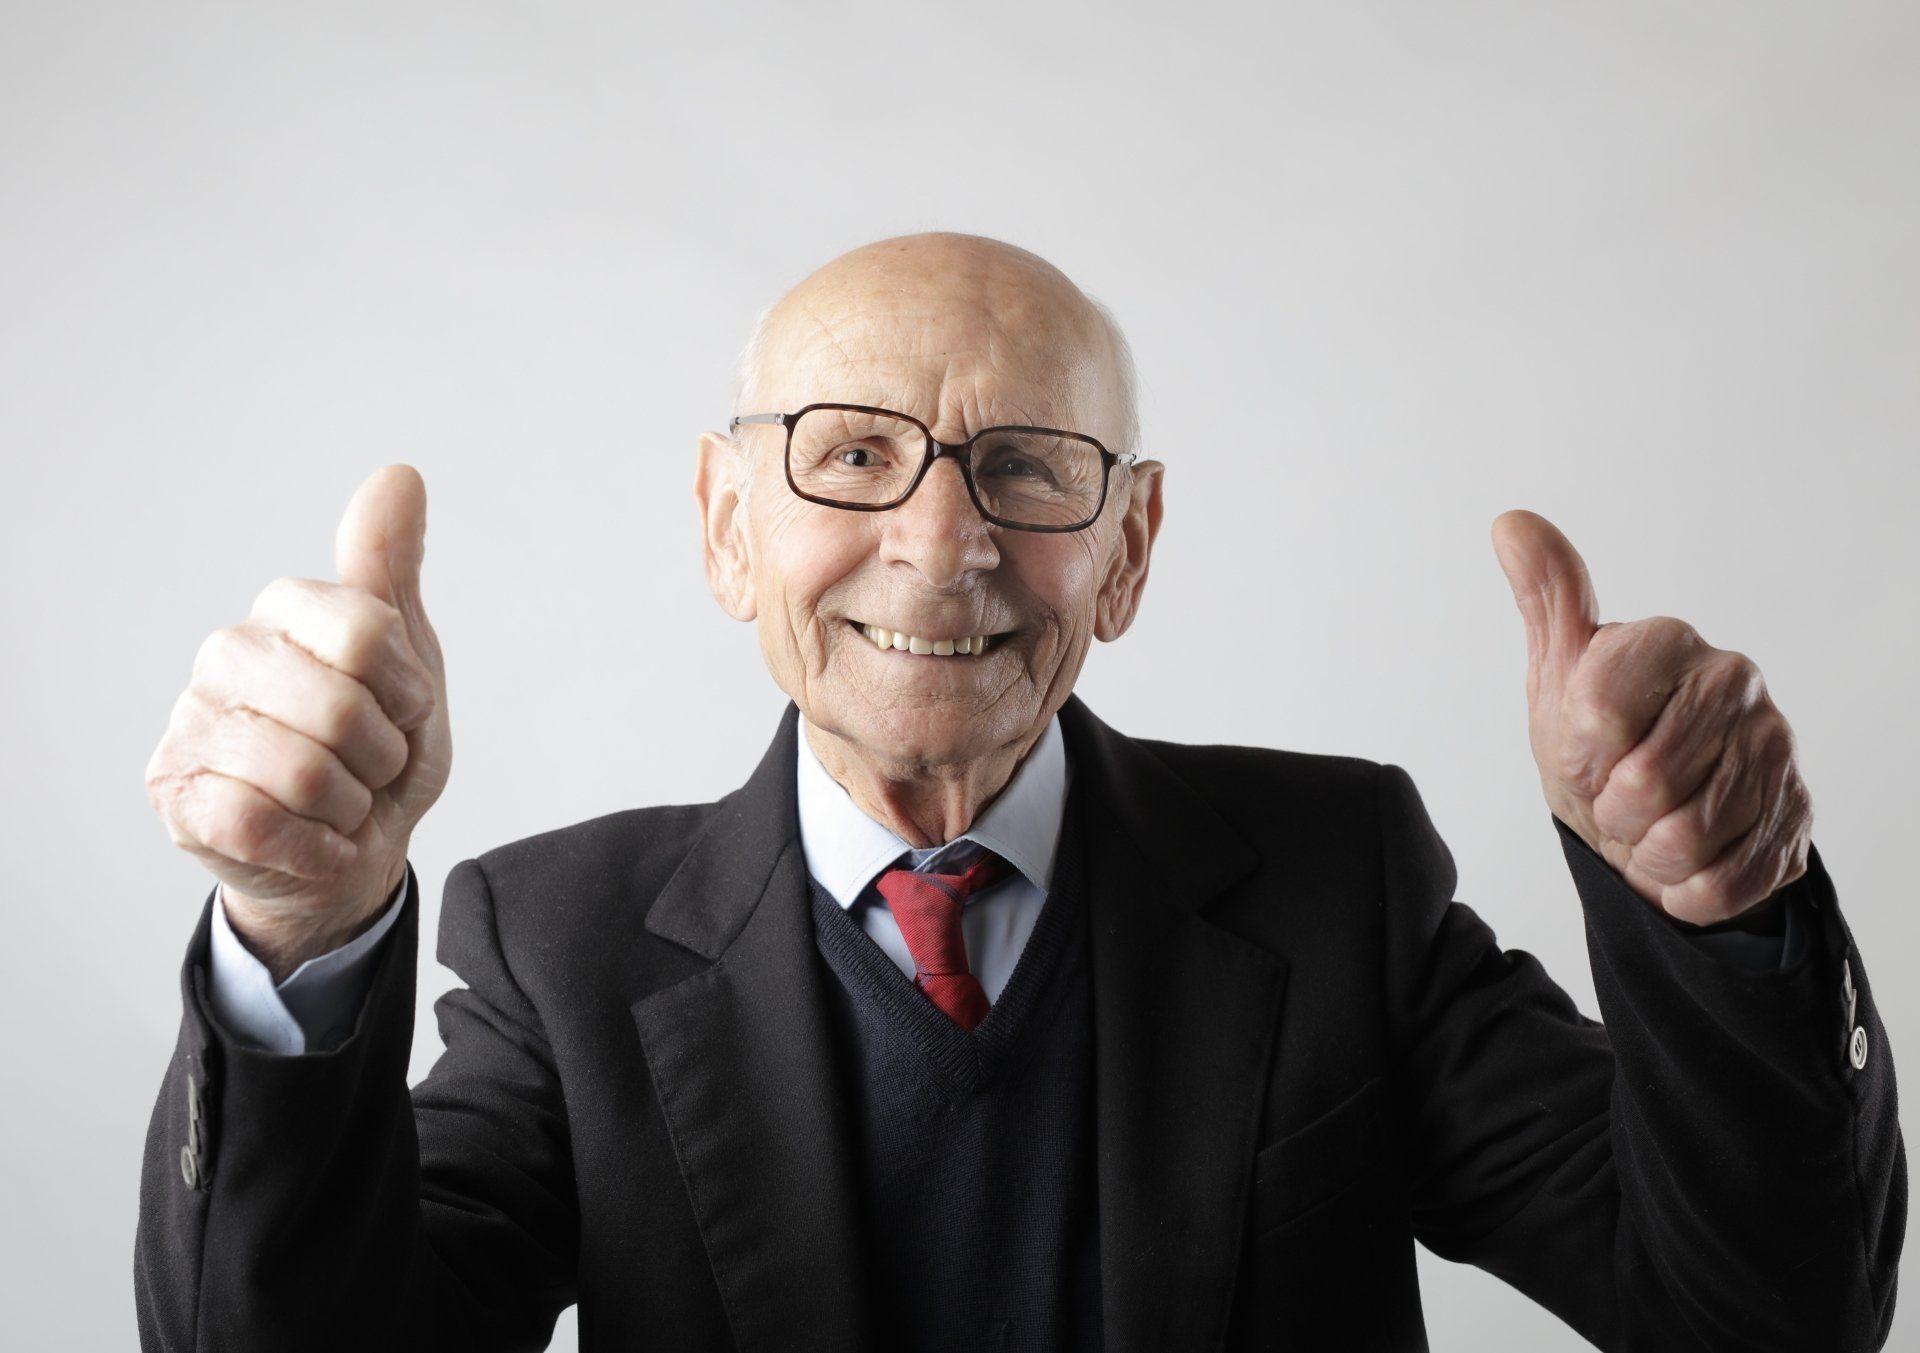 An elderly man in a suit and tie is giving two thumbs up.